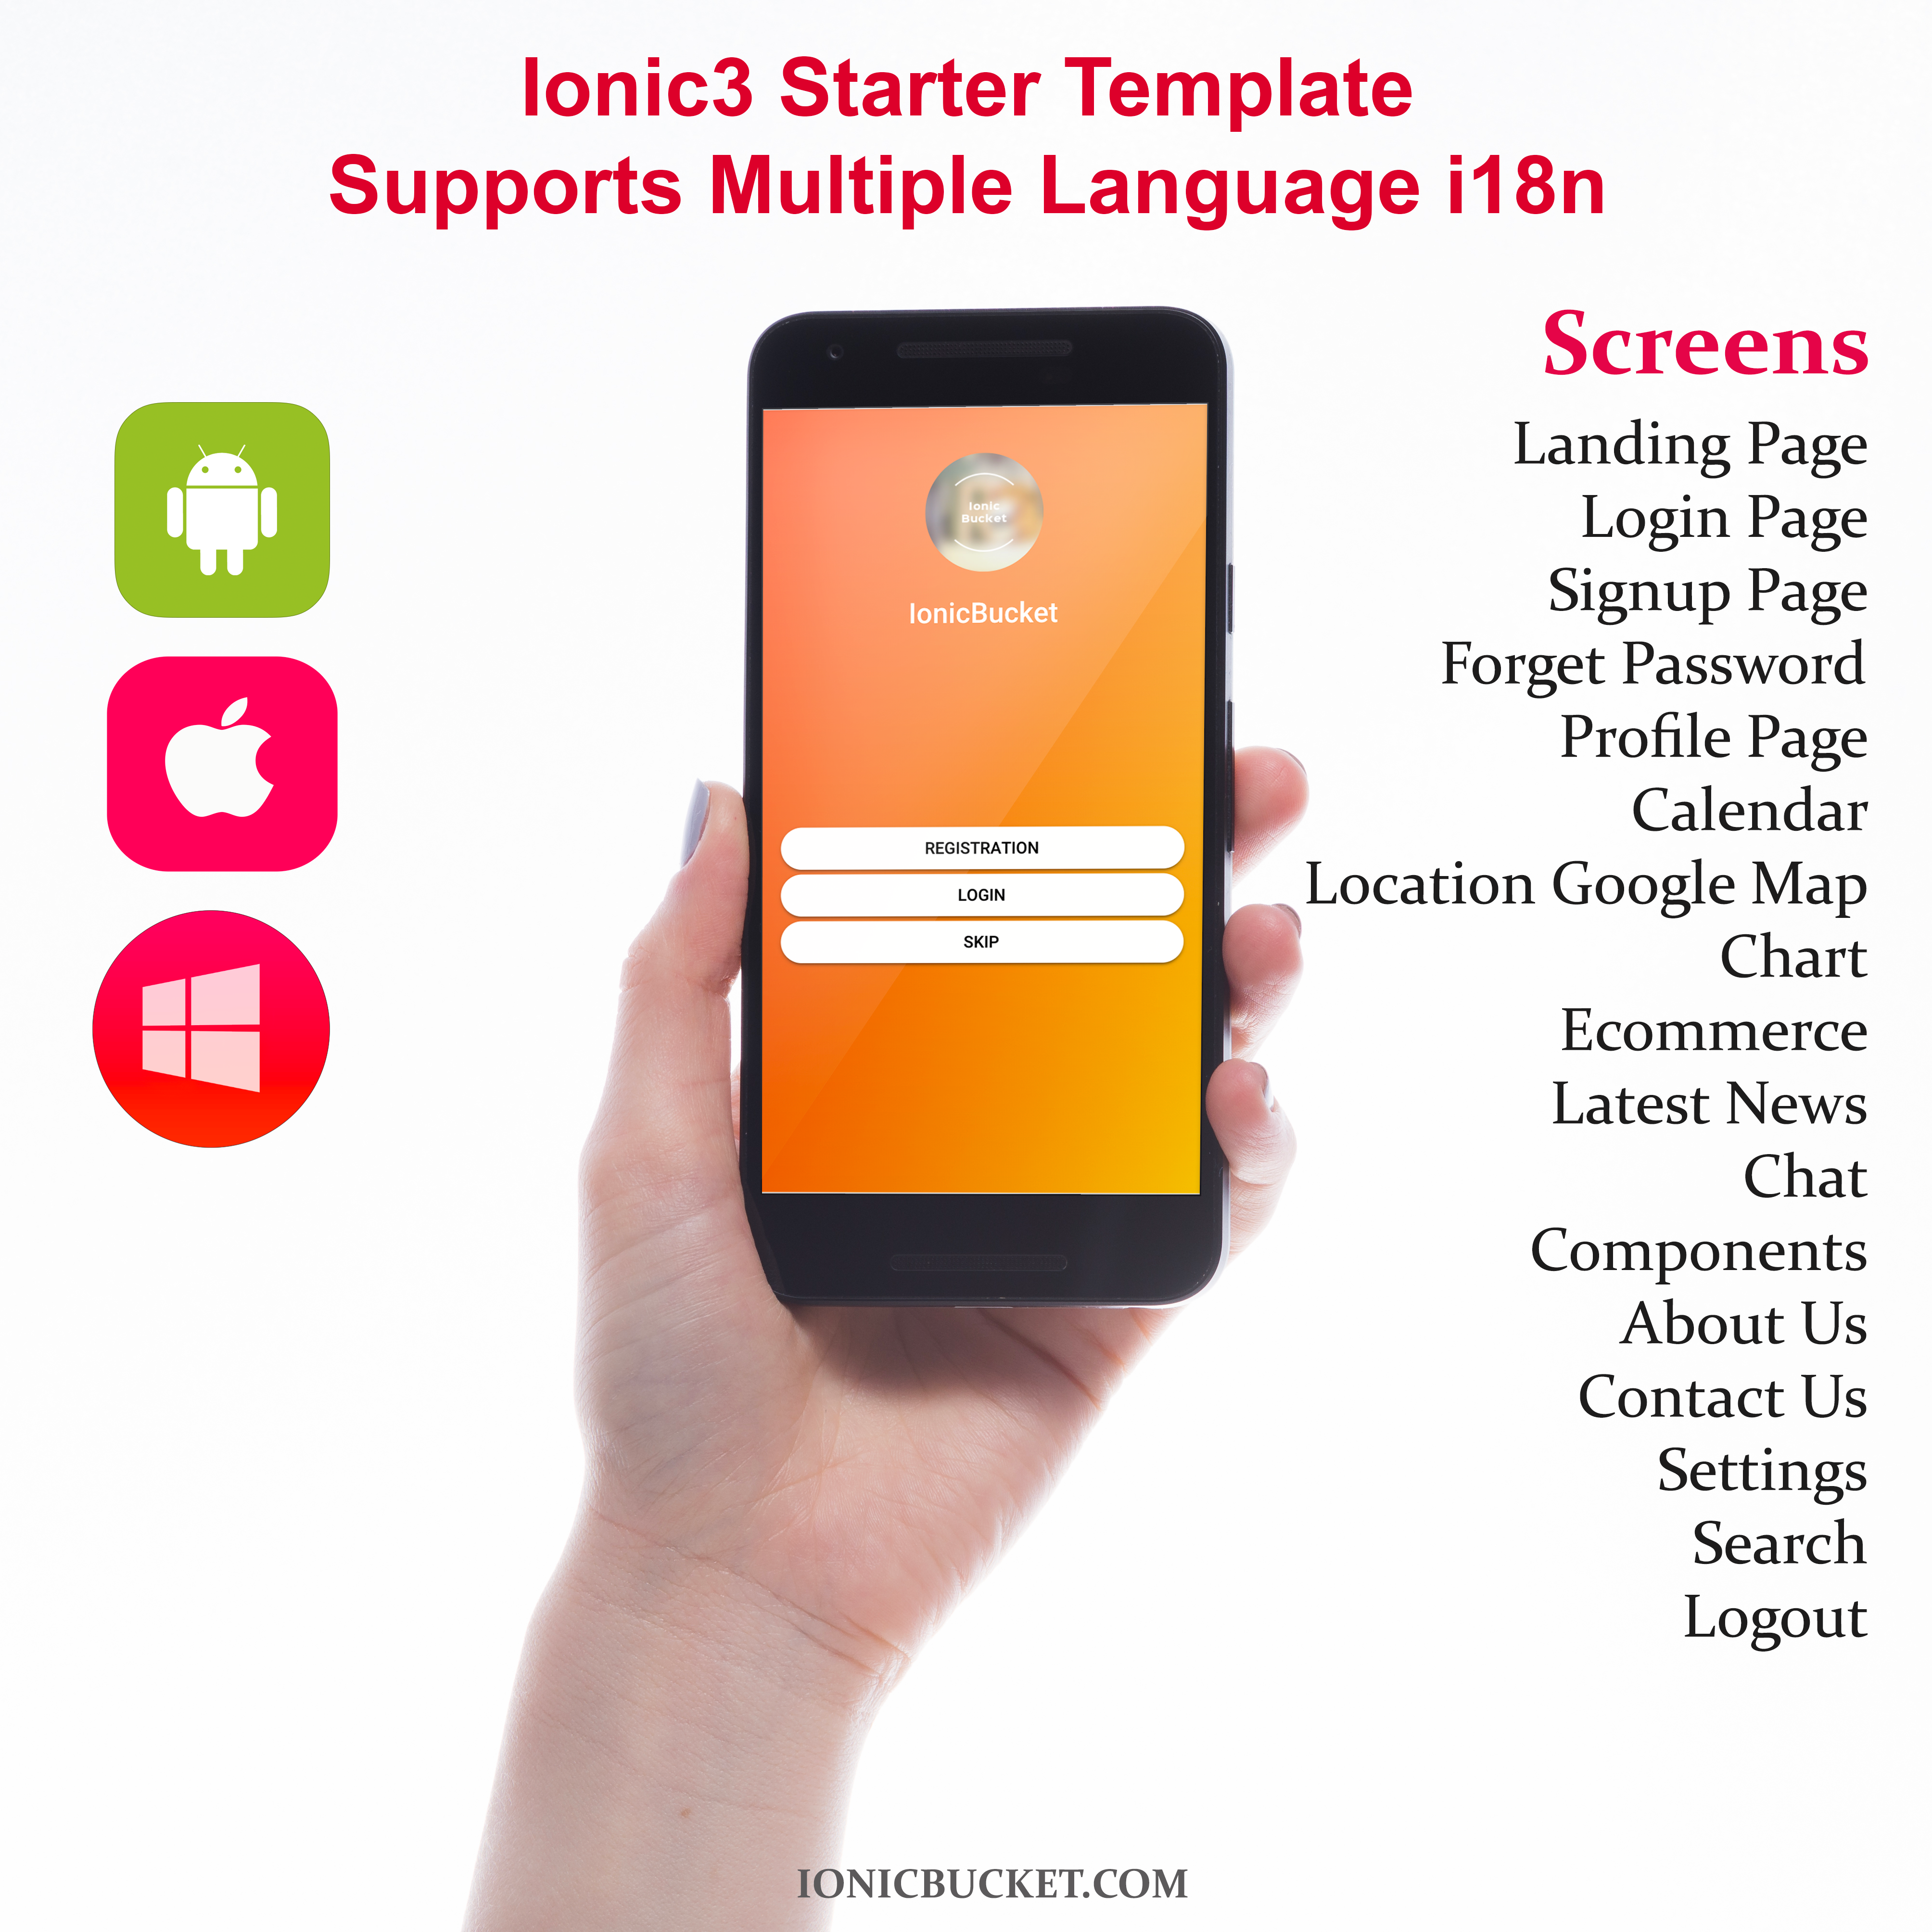 Ionic3 Starter Template Supports Multiple Language i18n - 3